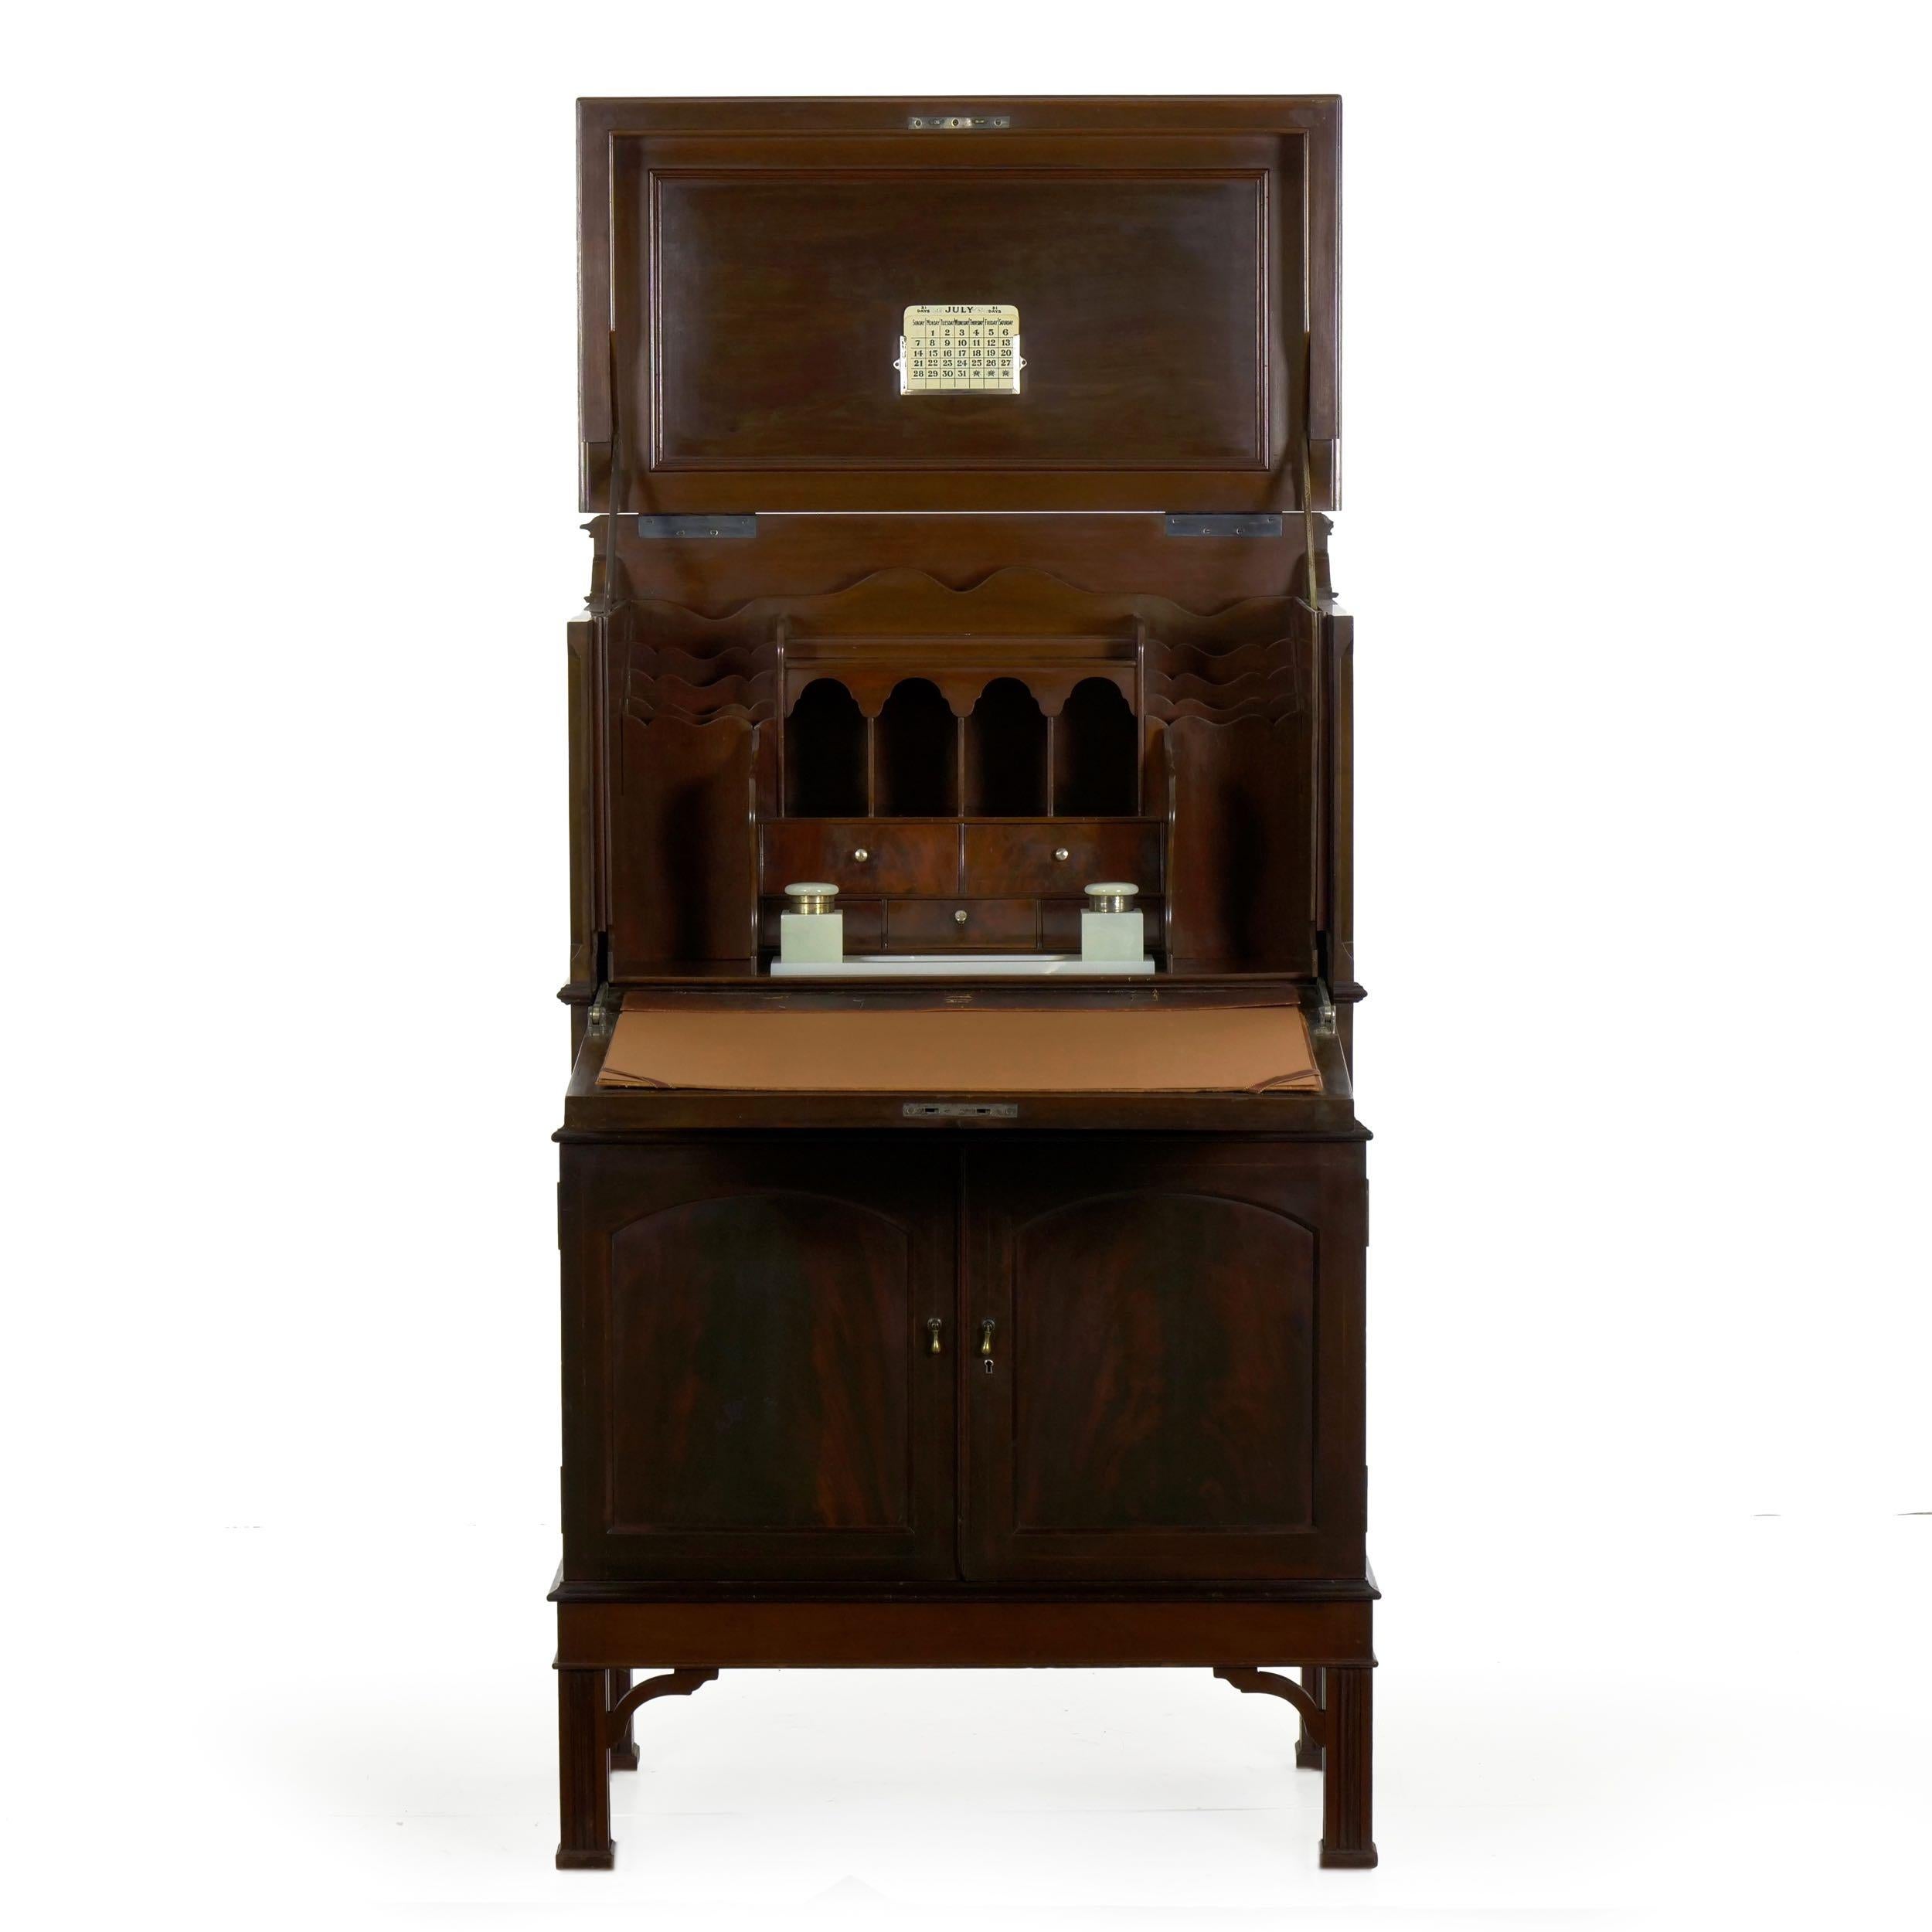 With a smooth operating action, this remarkably high quality English Edwardian period mahogany writing desk features a built-in Chubbs safe in the lower cabinet. The top and fall front act together using a hinged action, allowing the desk to open